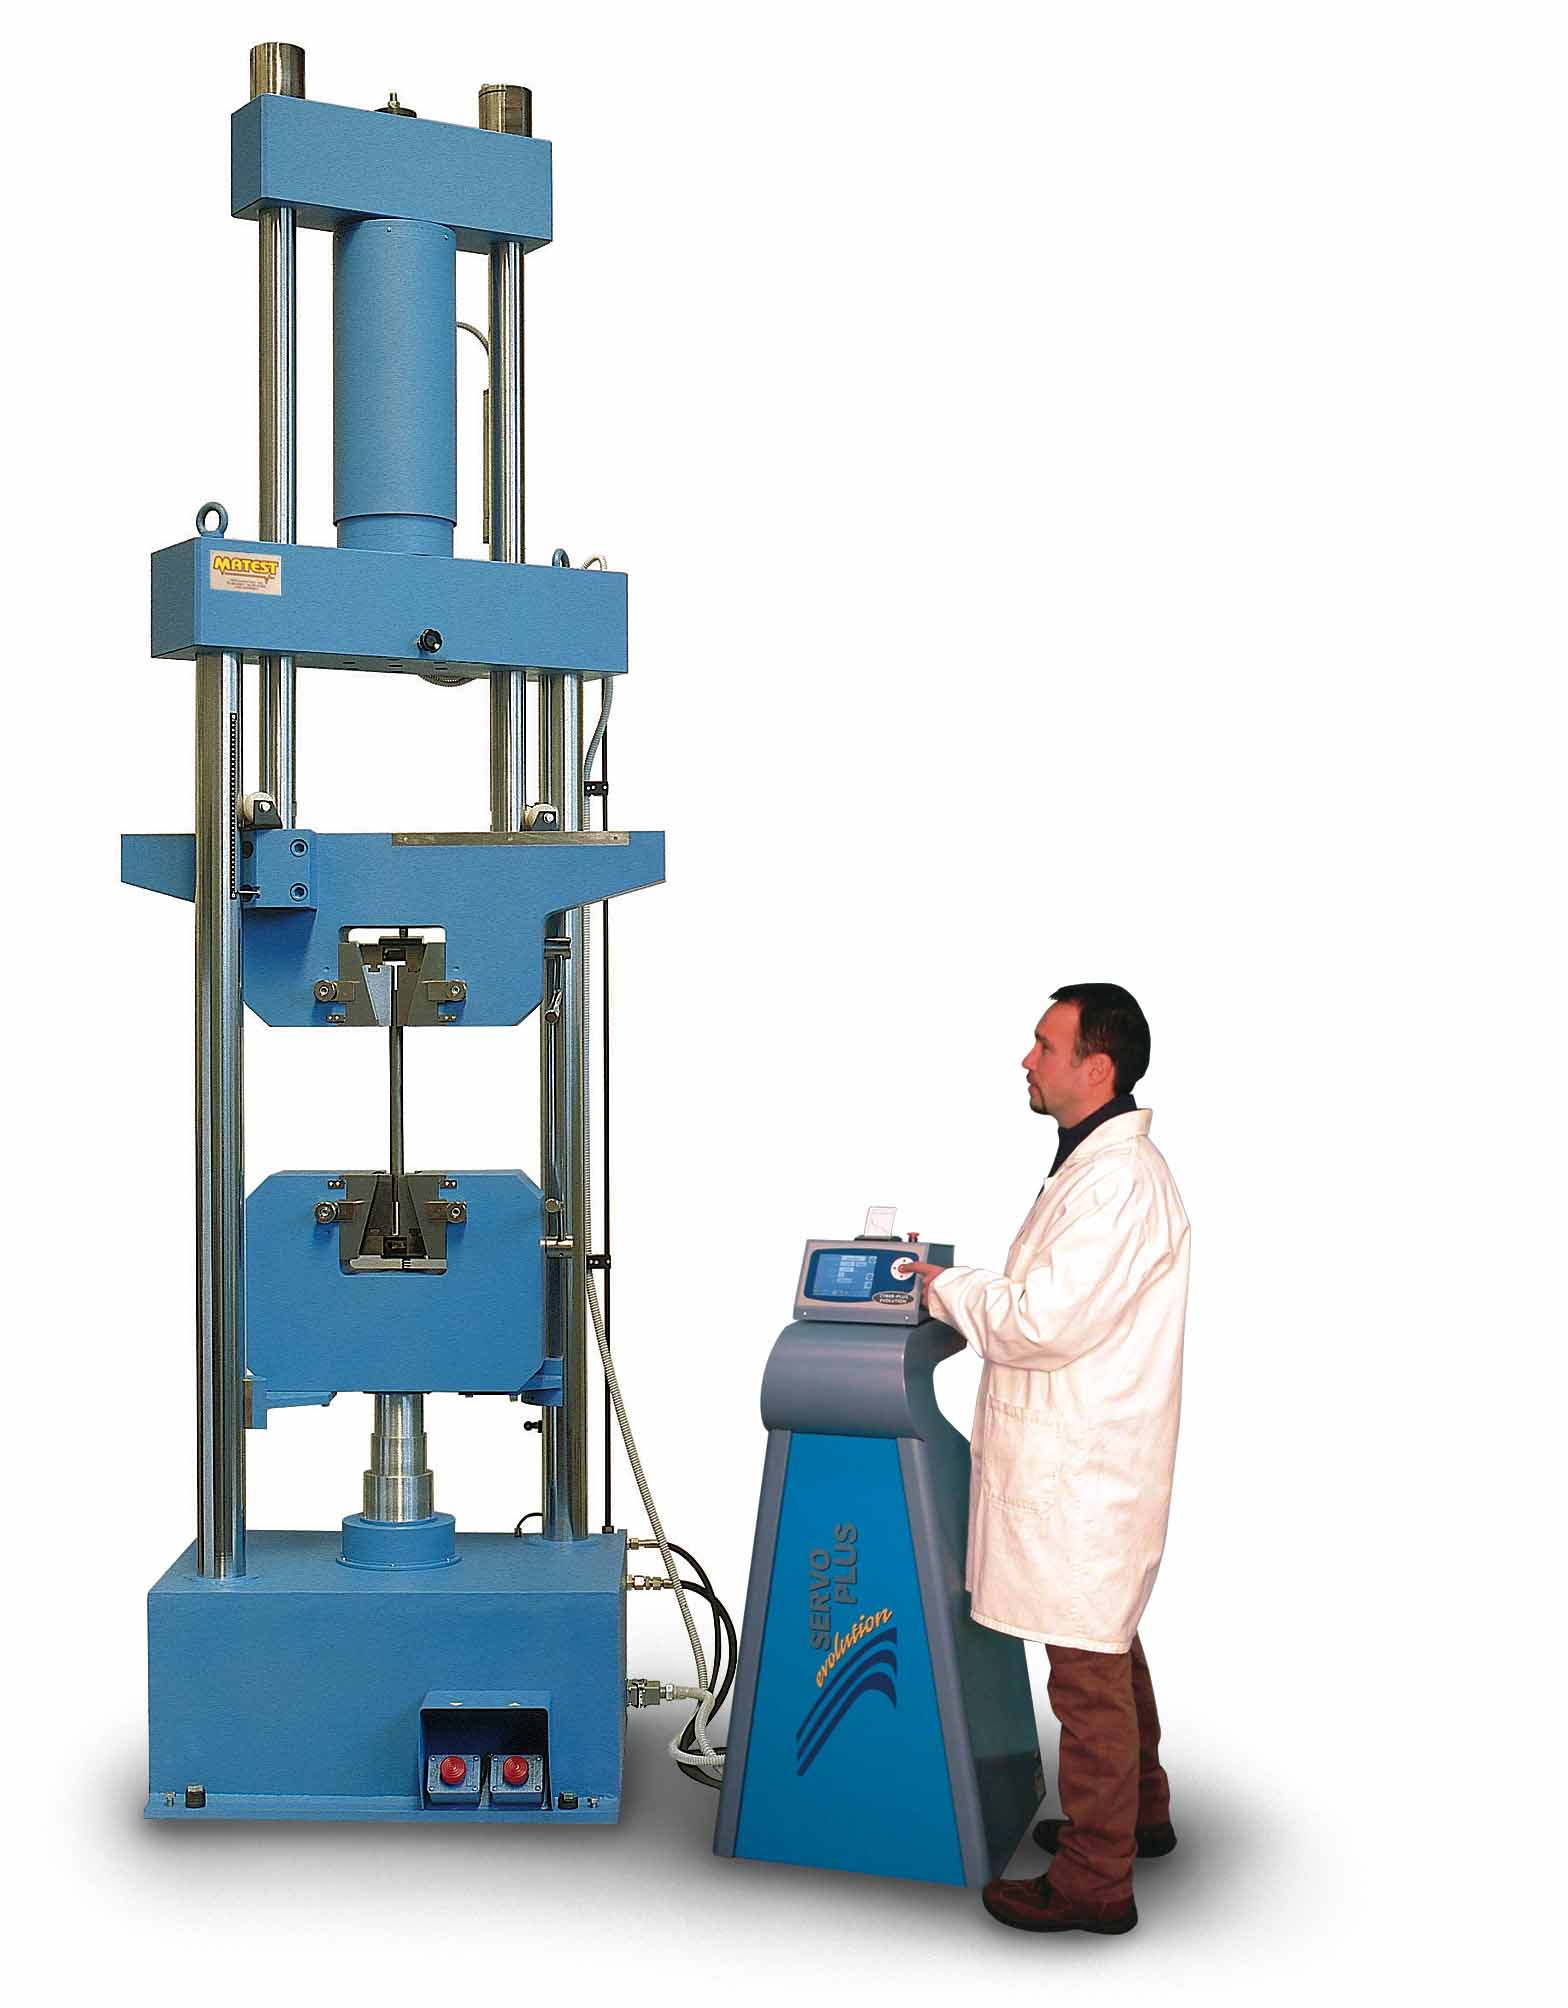 UNIVERSAL HYDRAULIC SERVO-CONTROLLED MACHINE, 600 kN, FOR STATIC TENSILE TESTS